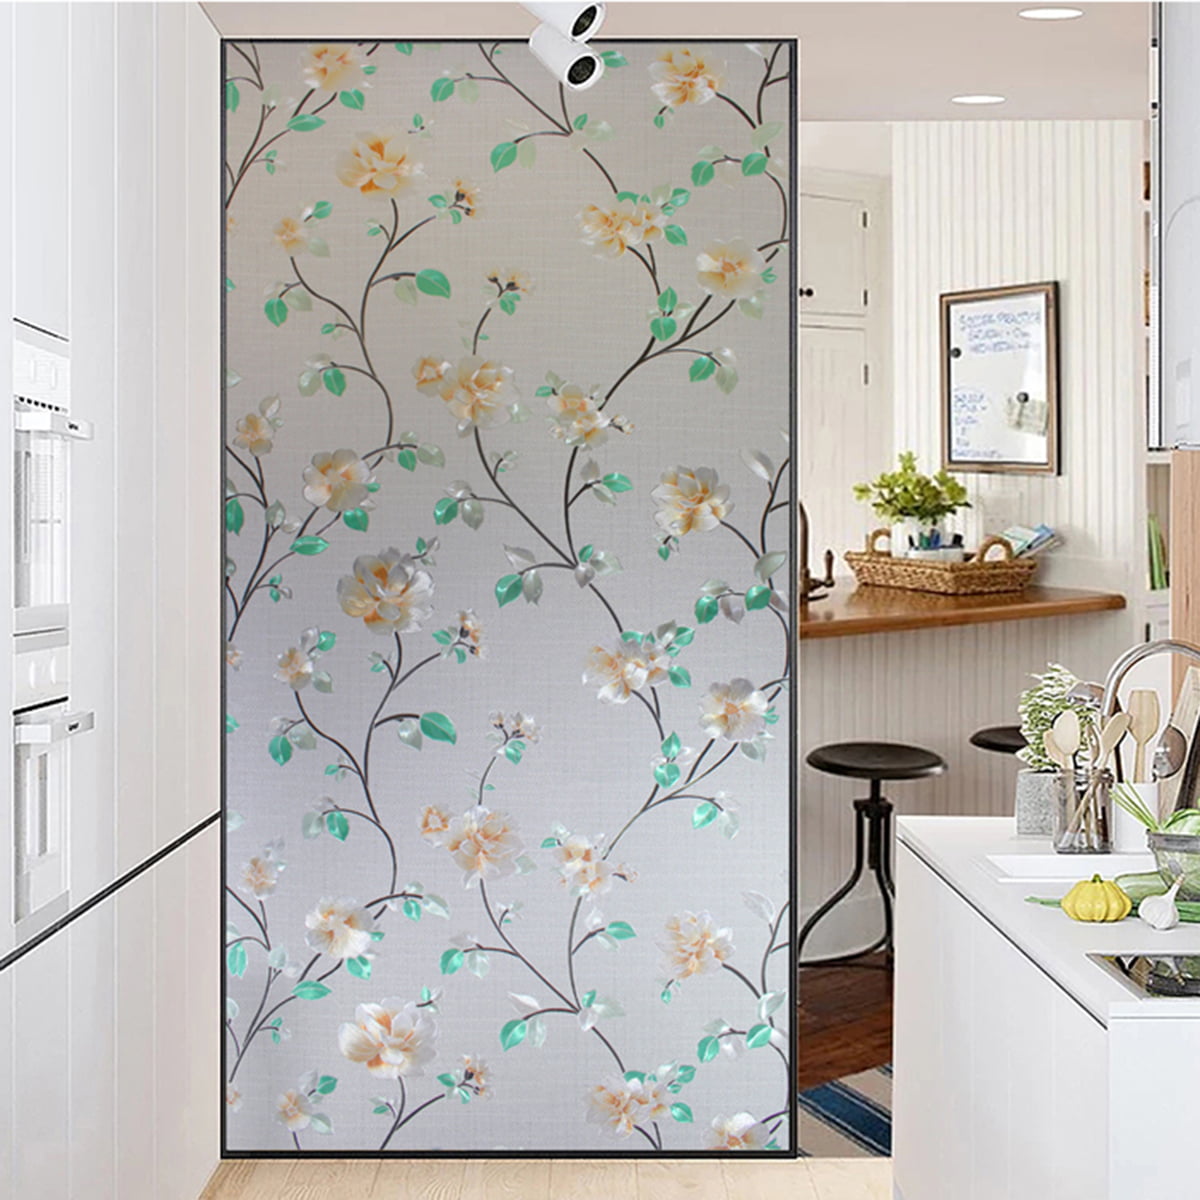 Waterproof Glass Frosted Bathroom window Privacy Self Adhesive Film Sticker 2019 